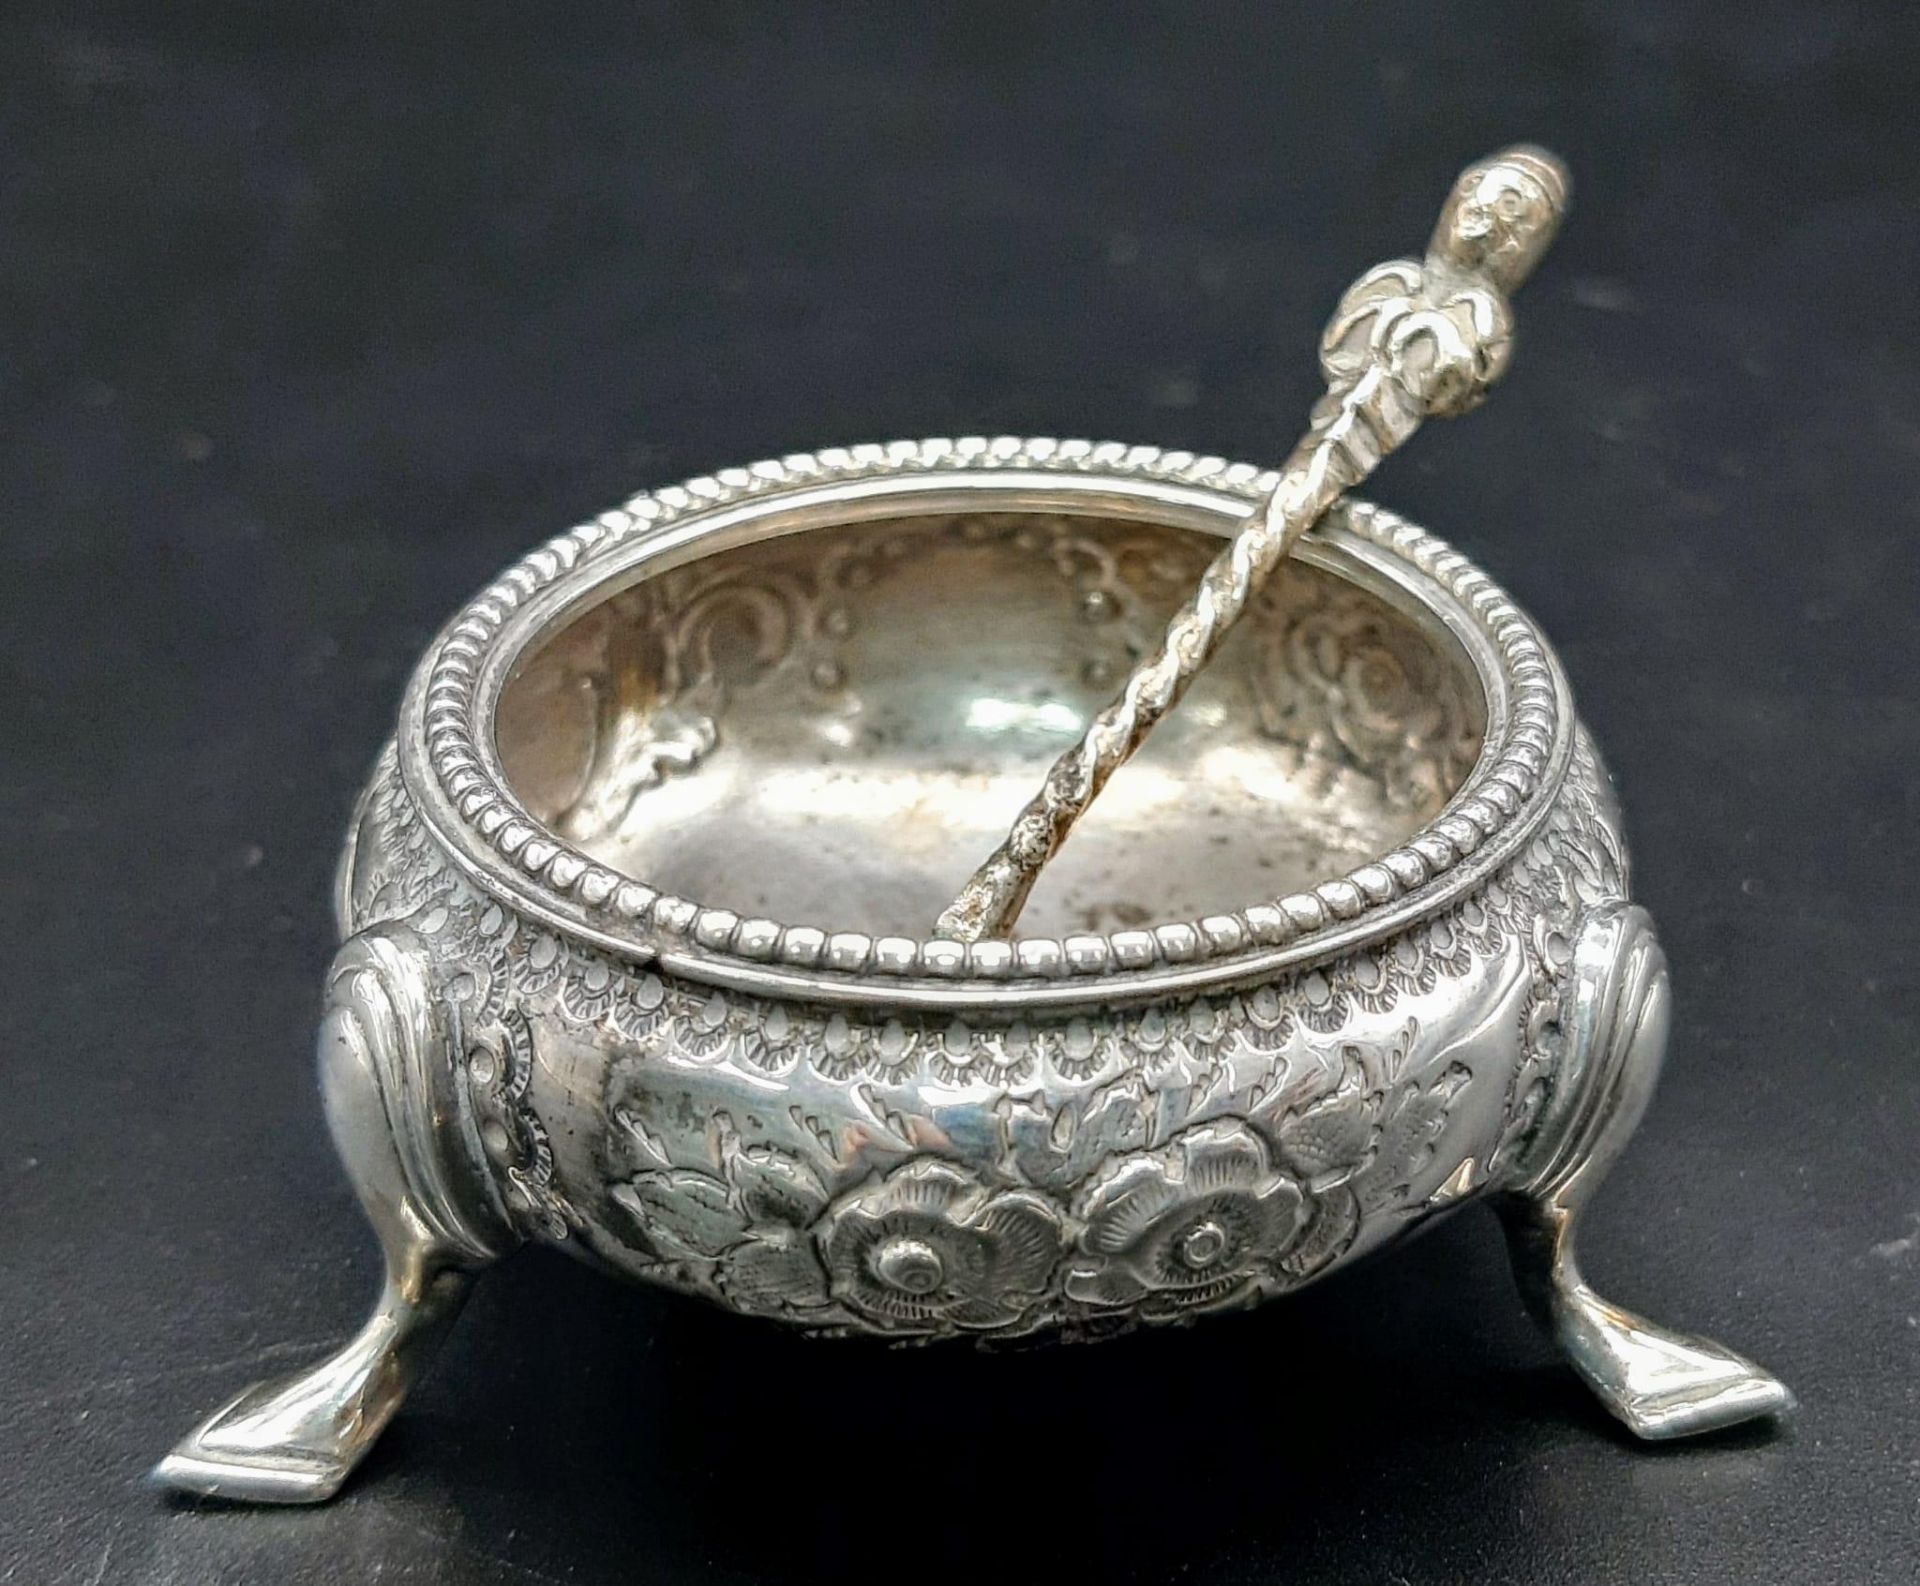 A set of Victorian antique sterling silver salt cellar with nicely floral ornate and silver spoon